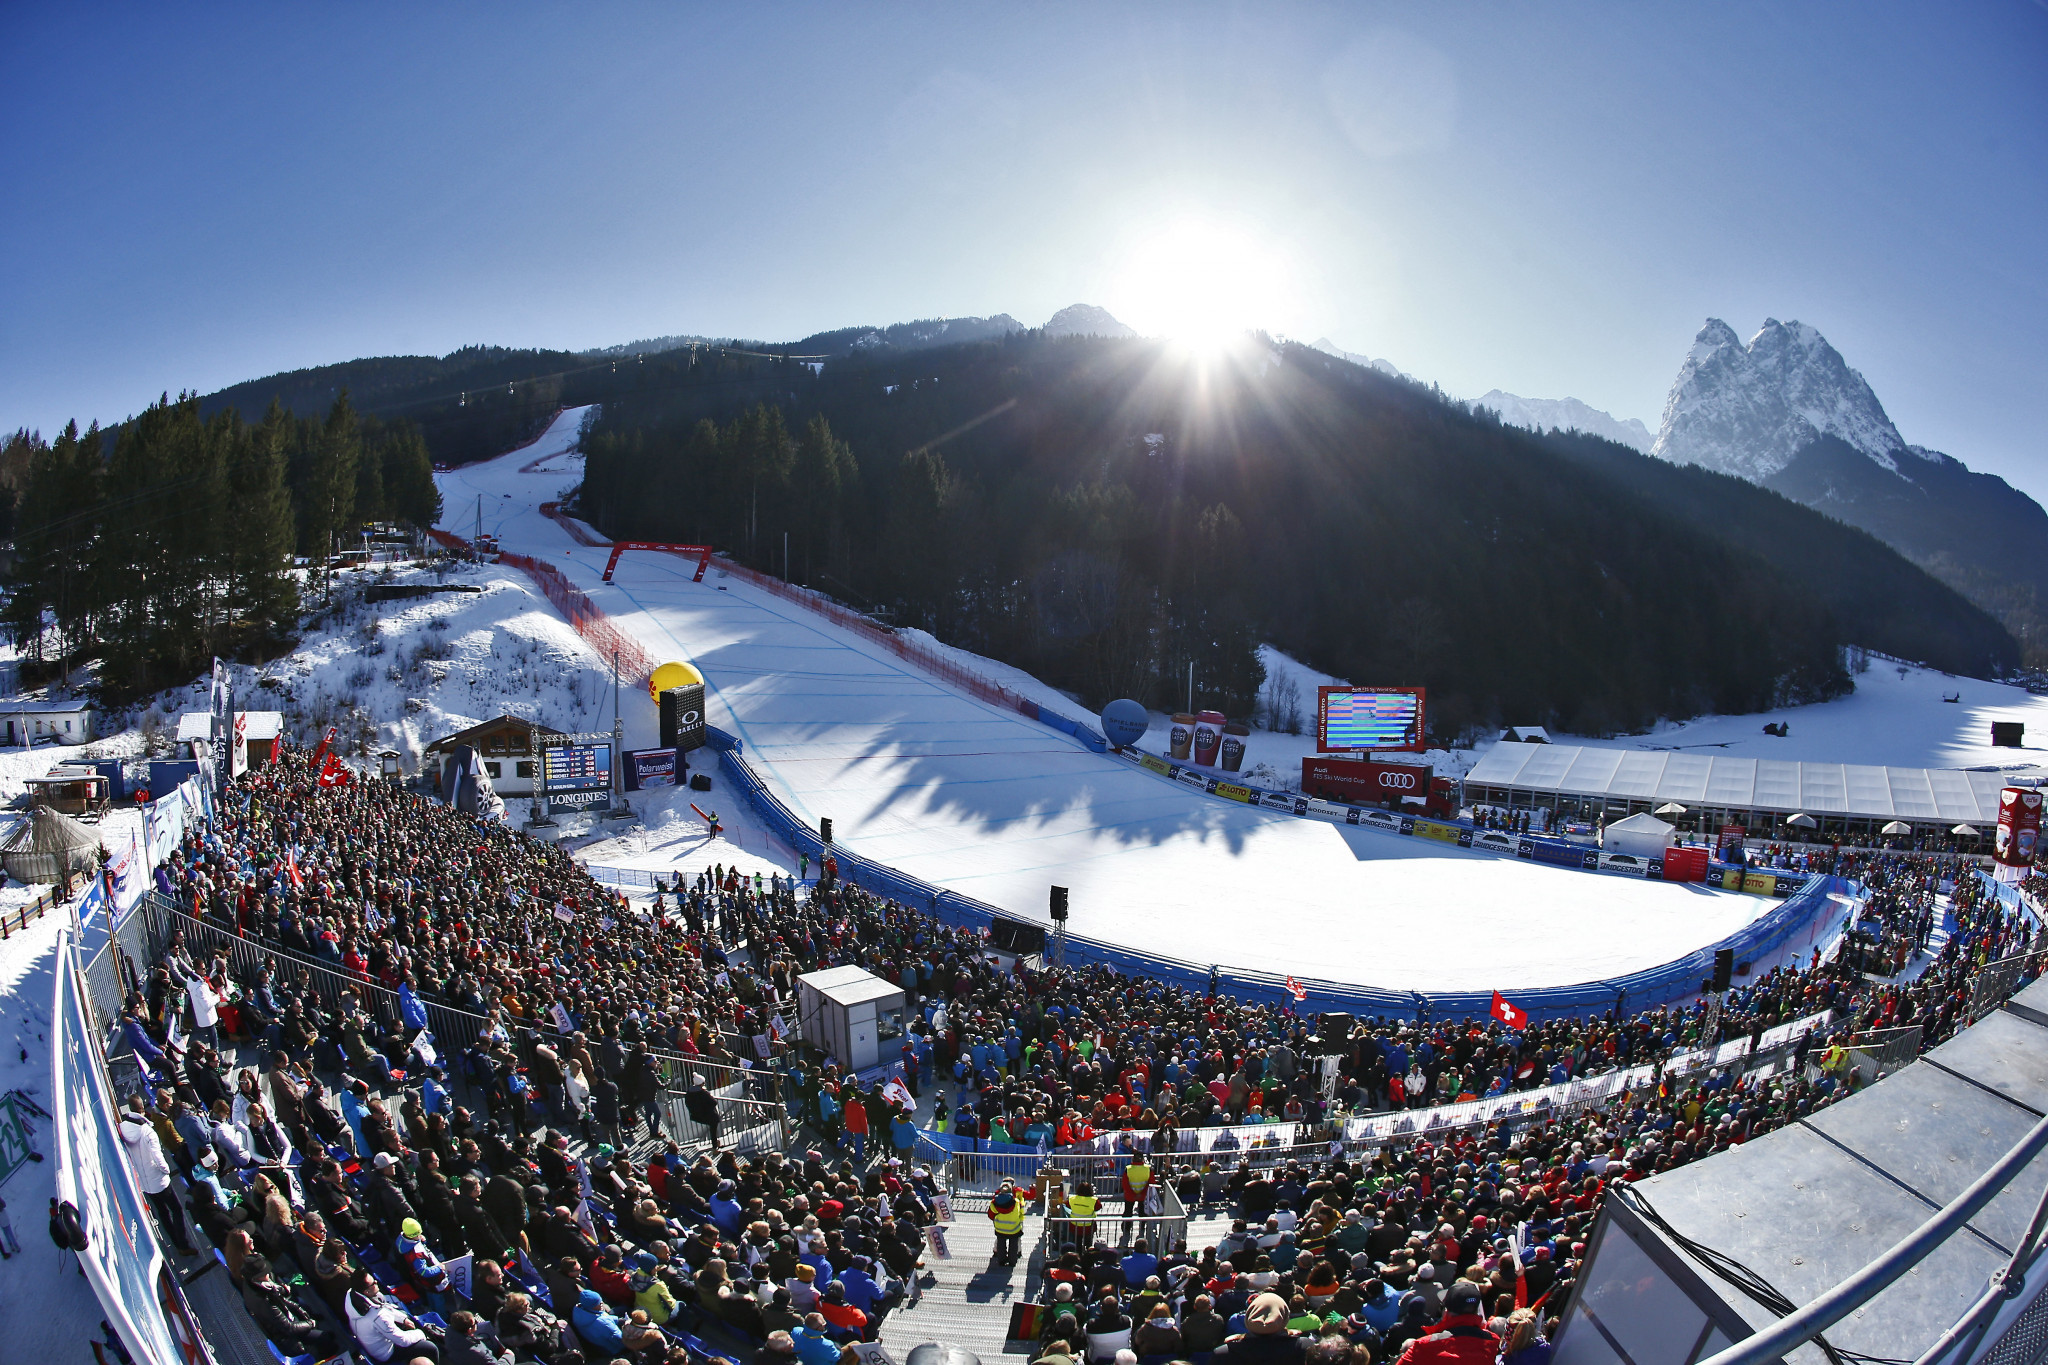 The view of the FIS Alpine Ski World Cup men's downhill at German venue Garmisch-Partenkirchen in January last year